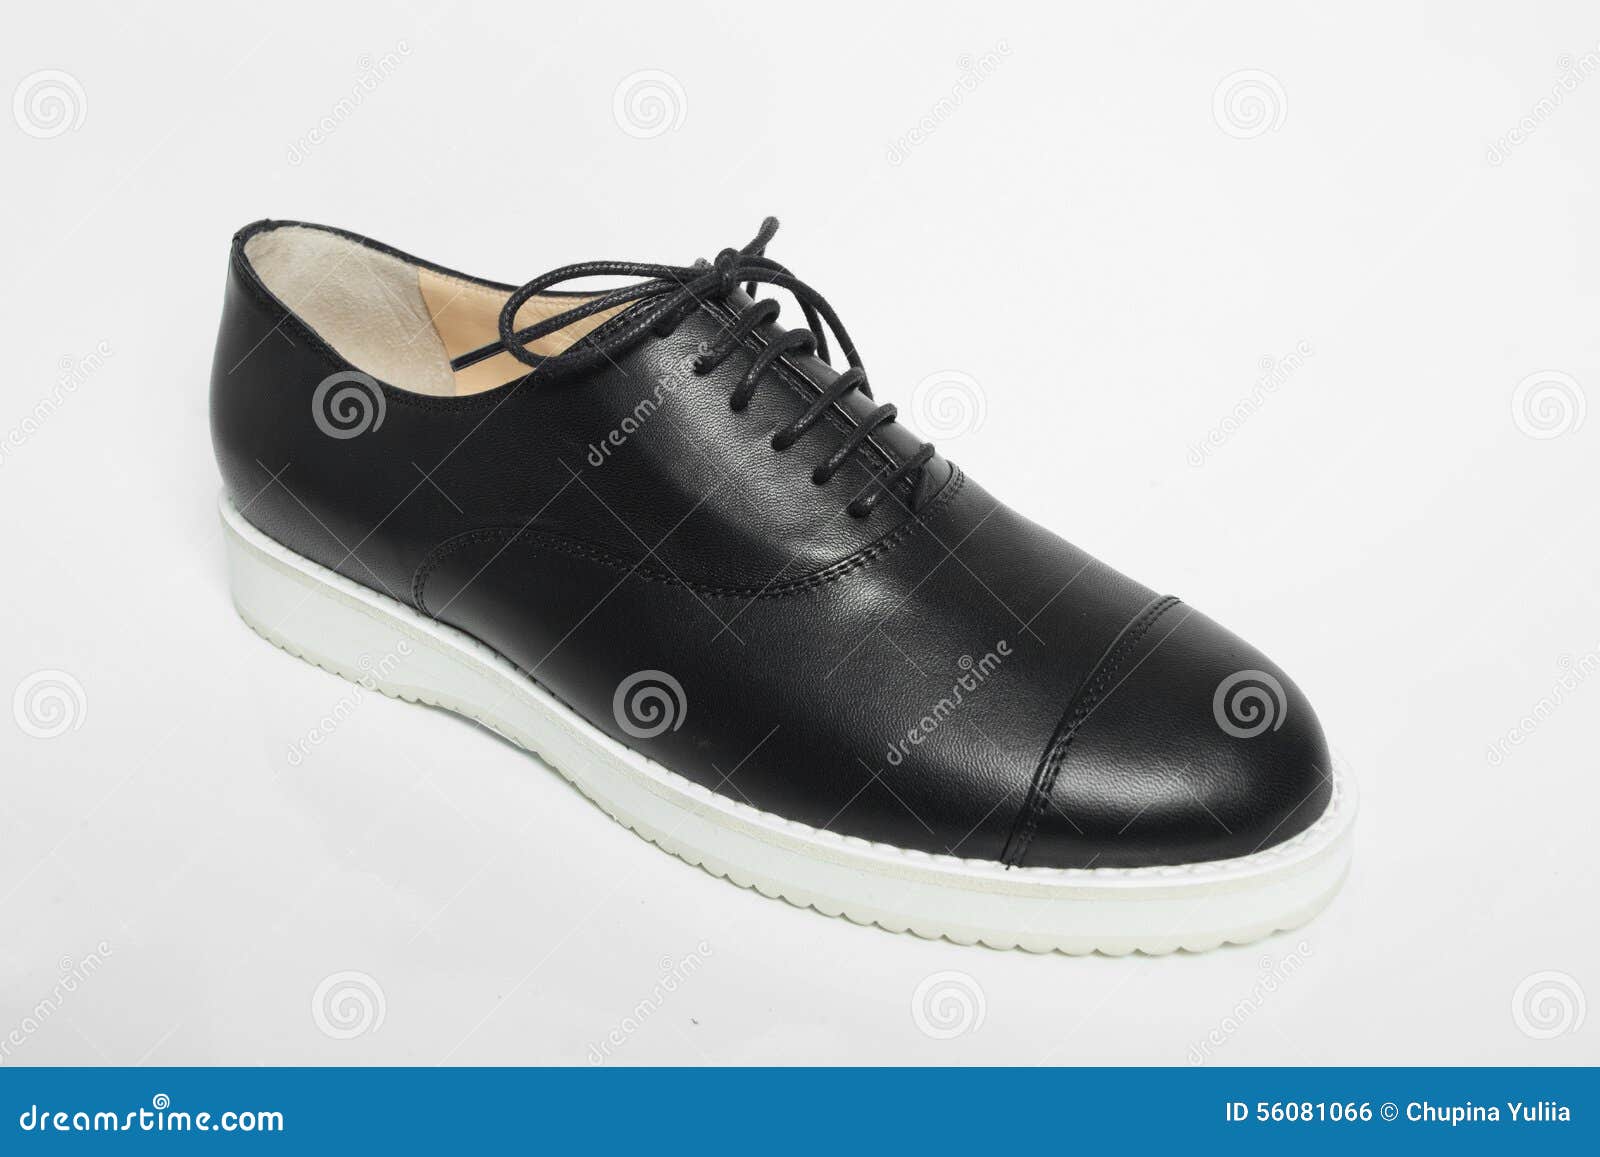 Men shoes isolated stock photo. Image of triend, isolated - 56081066